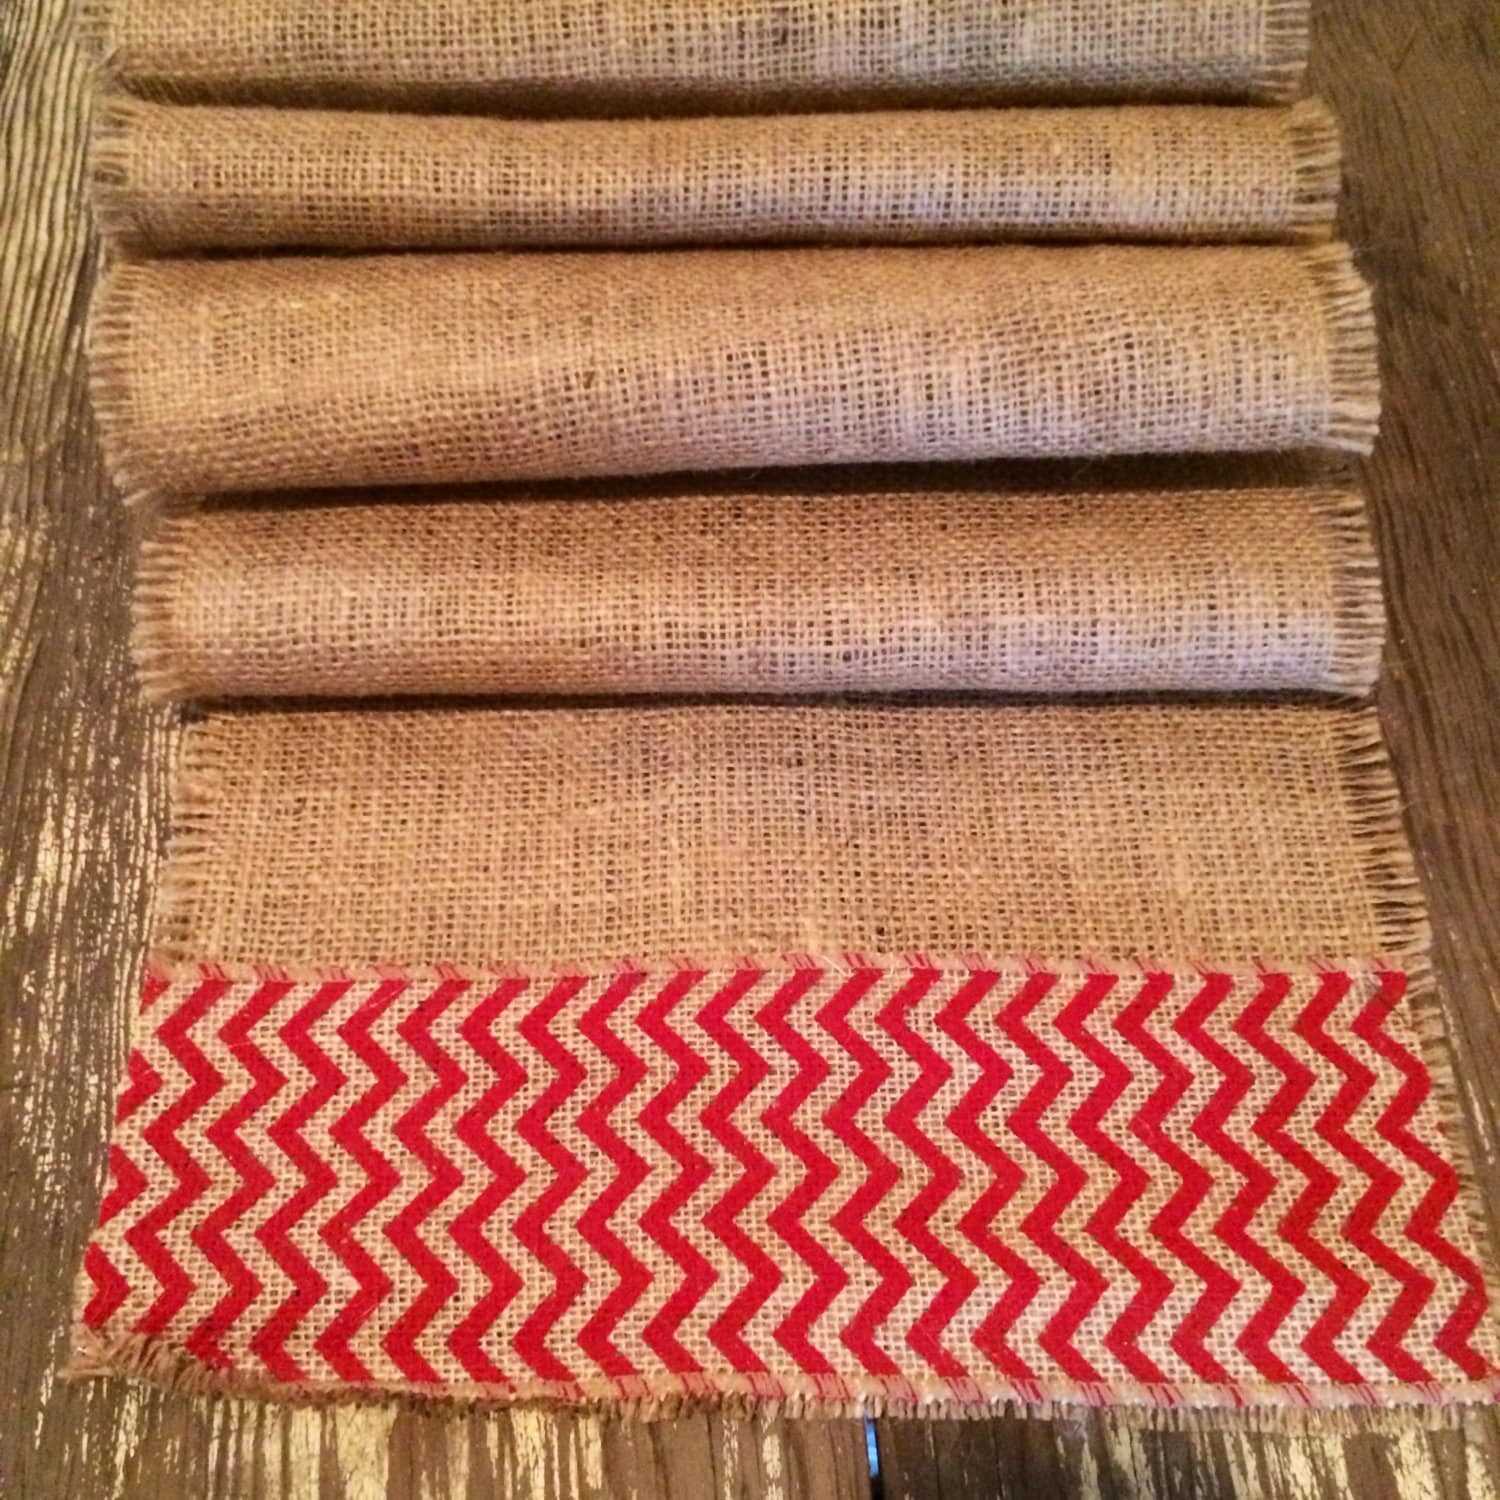 Chevron Table Runners - 6ft tables